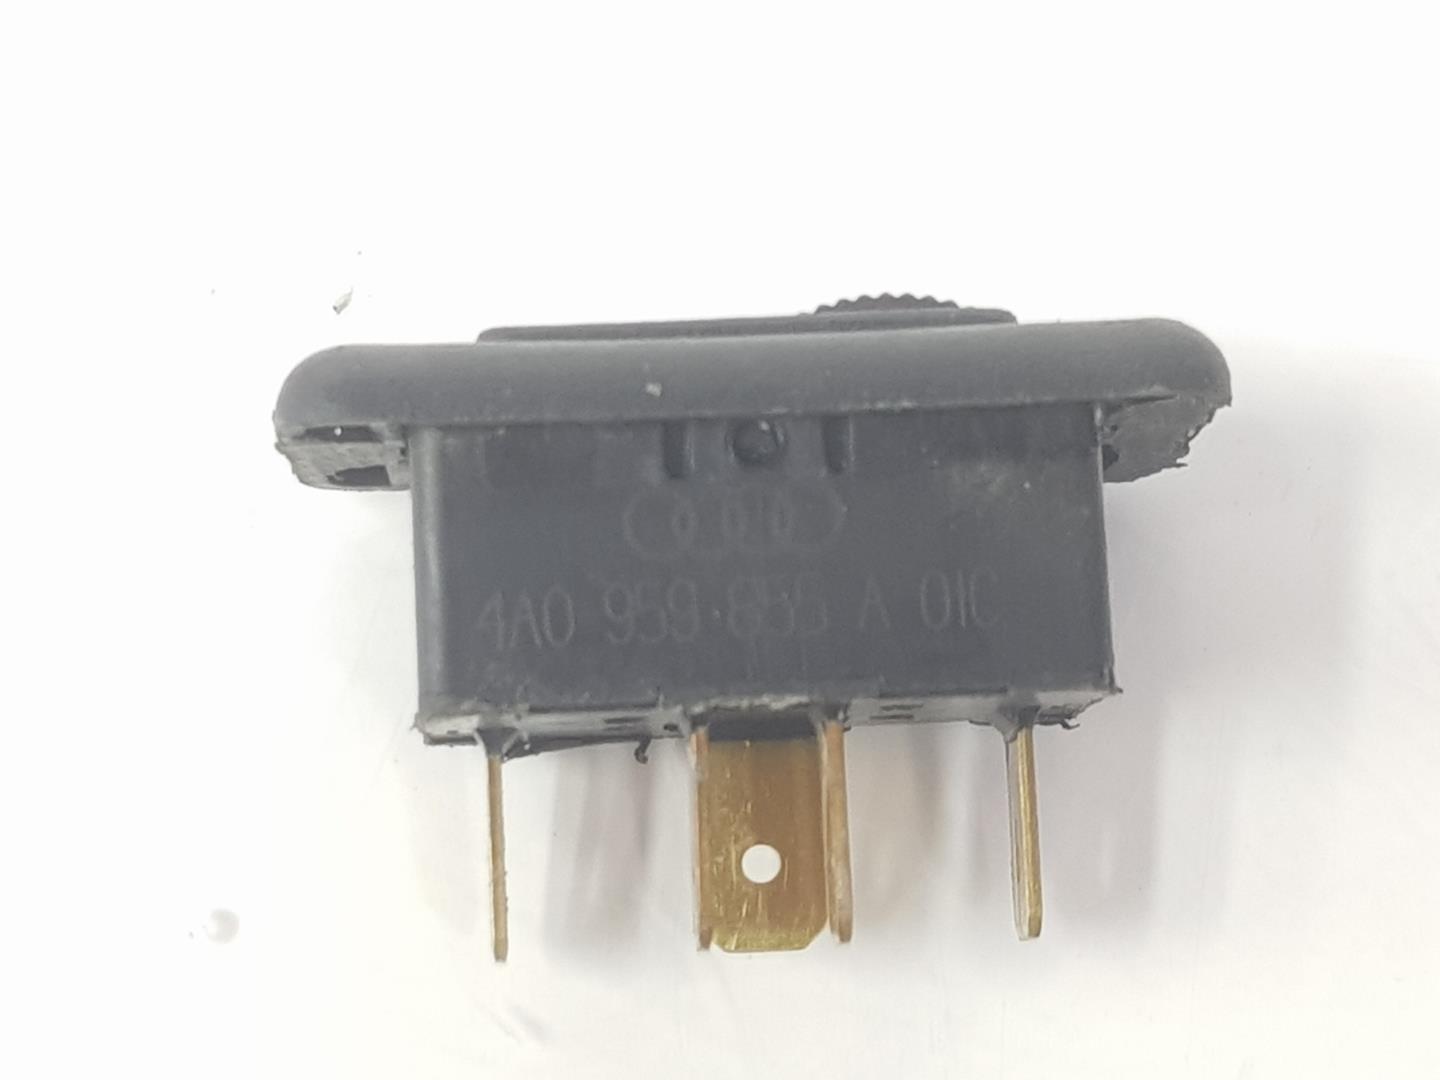 AUDI 200 C3 (1983-1988) Front Right Door Window Switch 4A0959855A, 4A0959855A 24154151